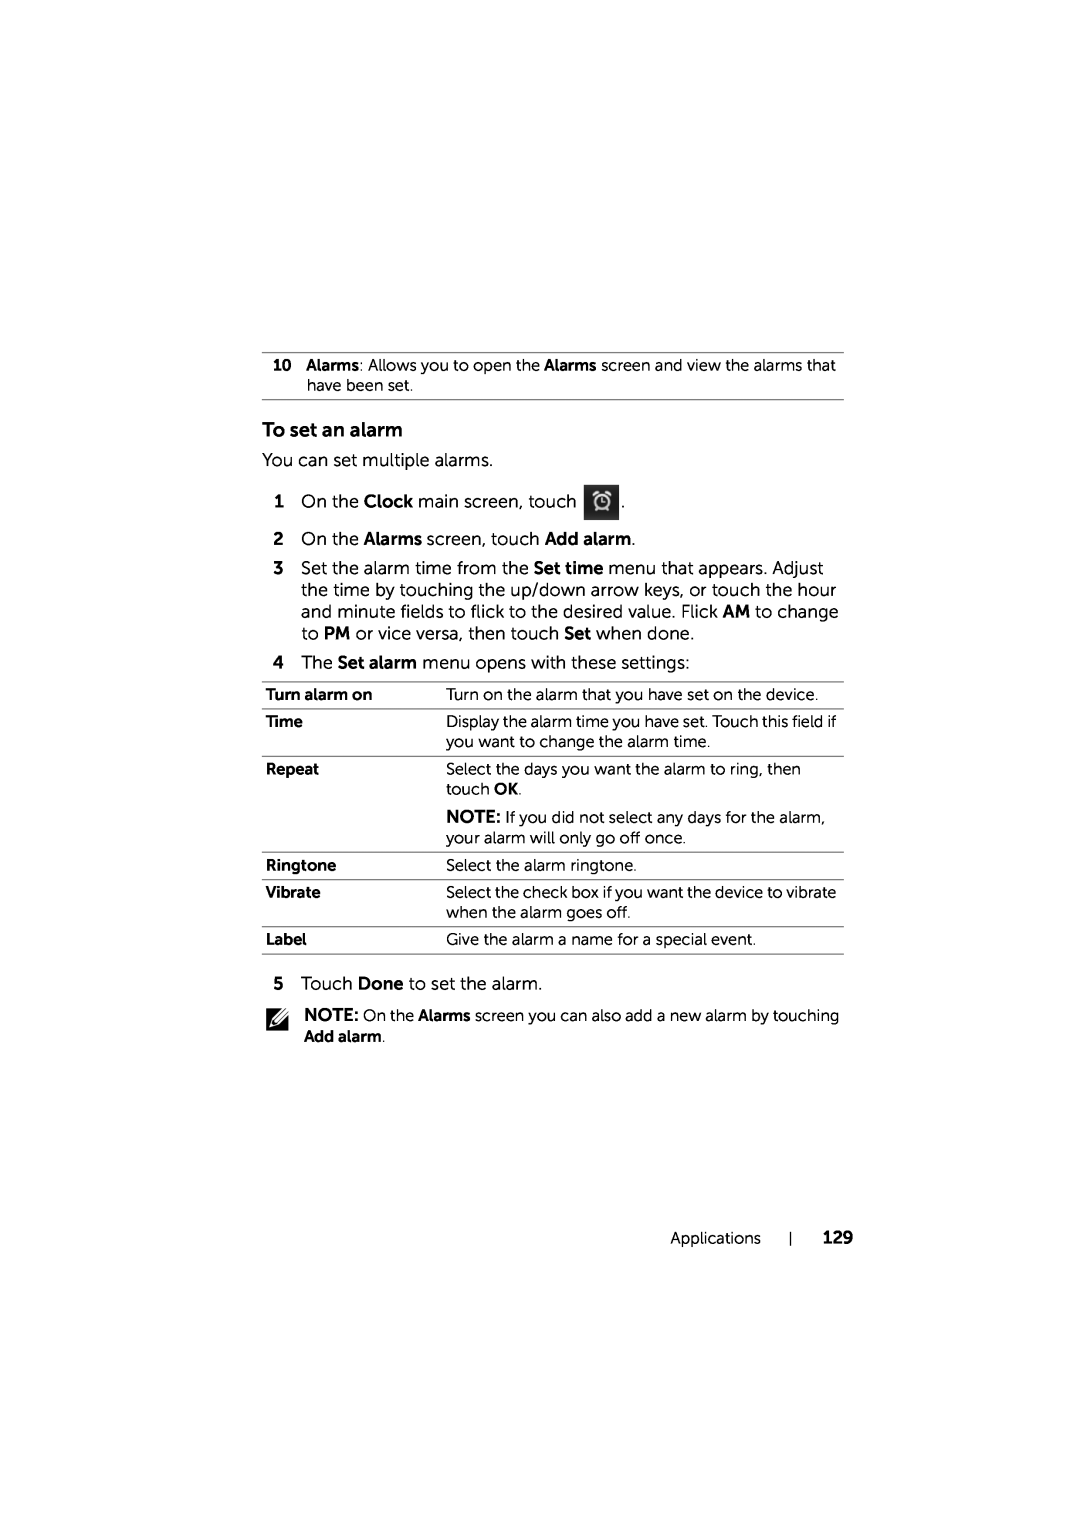 Dell LG7_bk0 user manual To set an alarm 